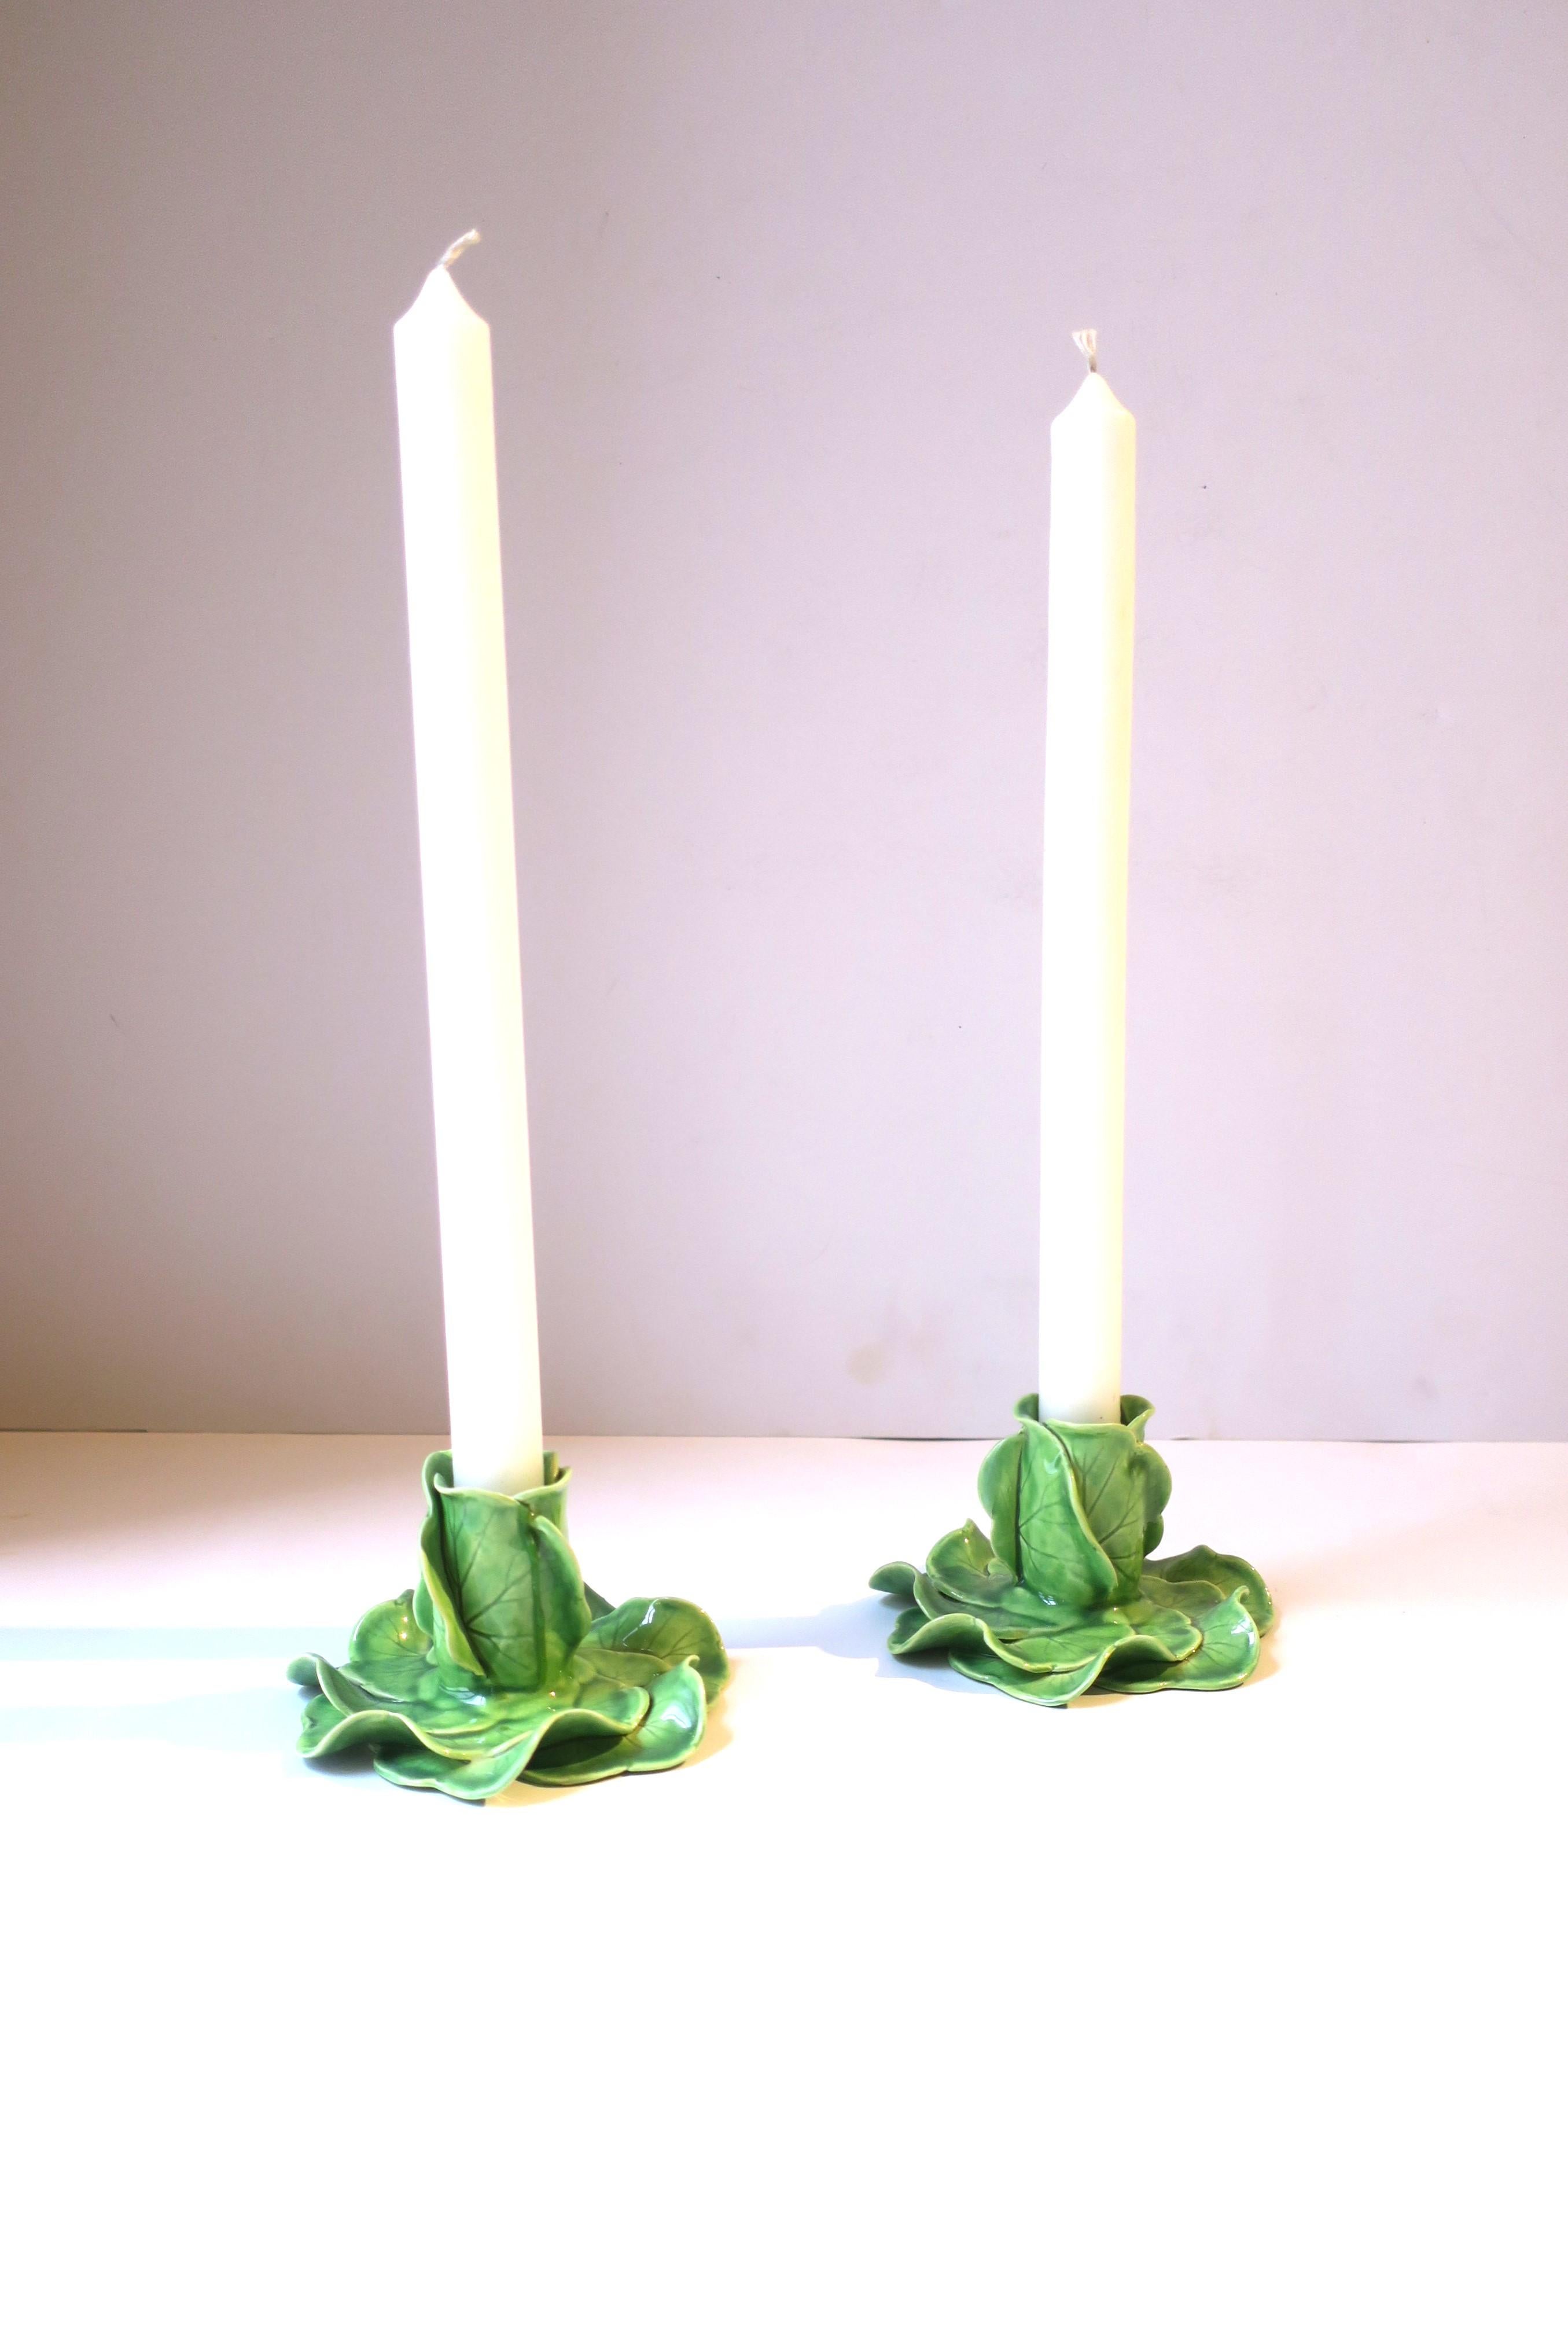 20th Century Green Porcelain Lettuce Leaf Candlestick Holders Styled After Dodie Thayer